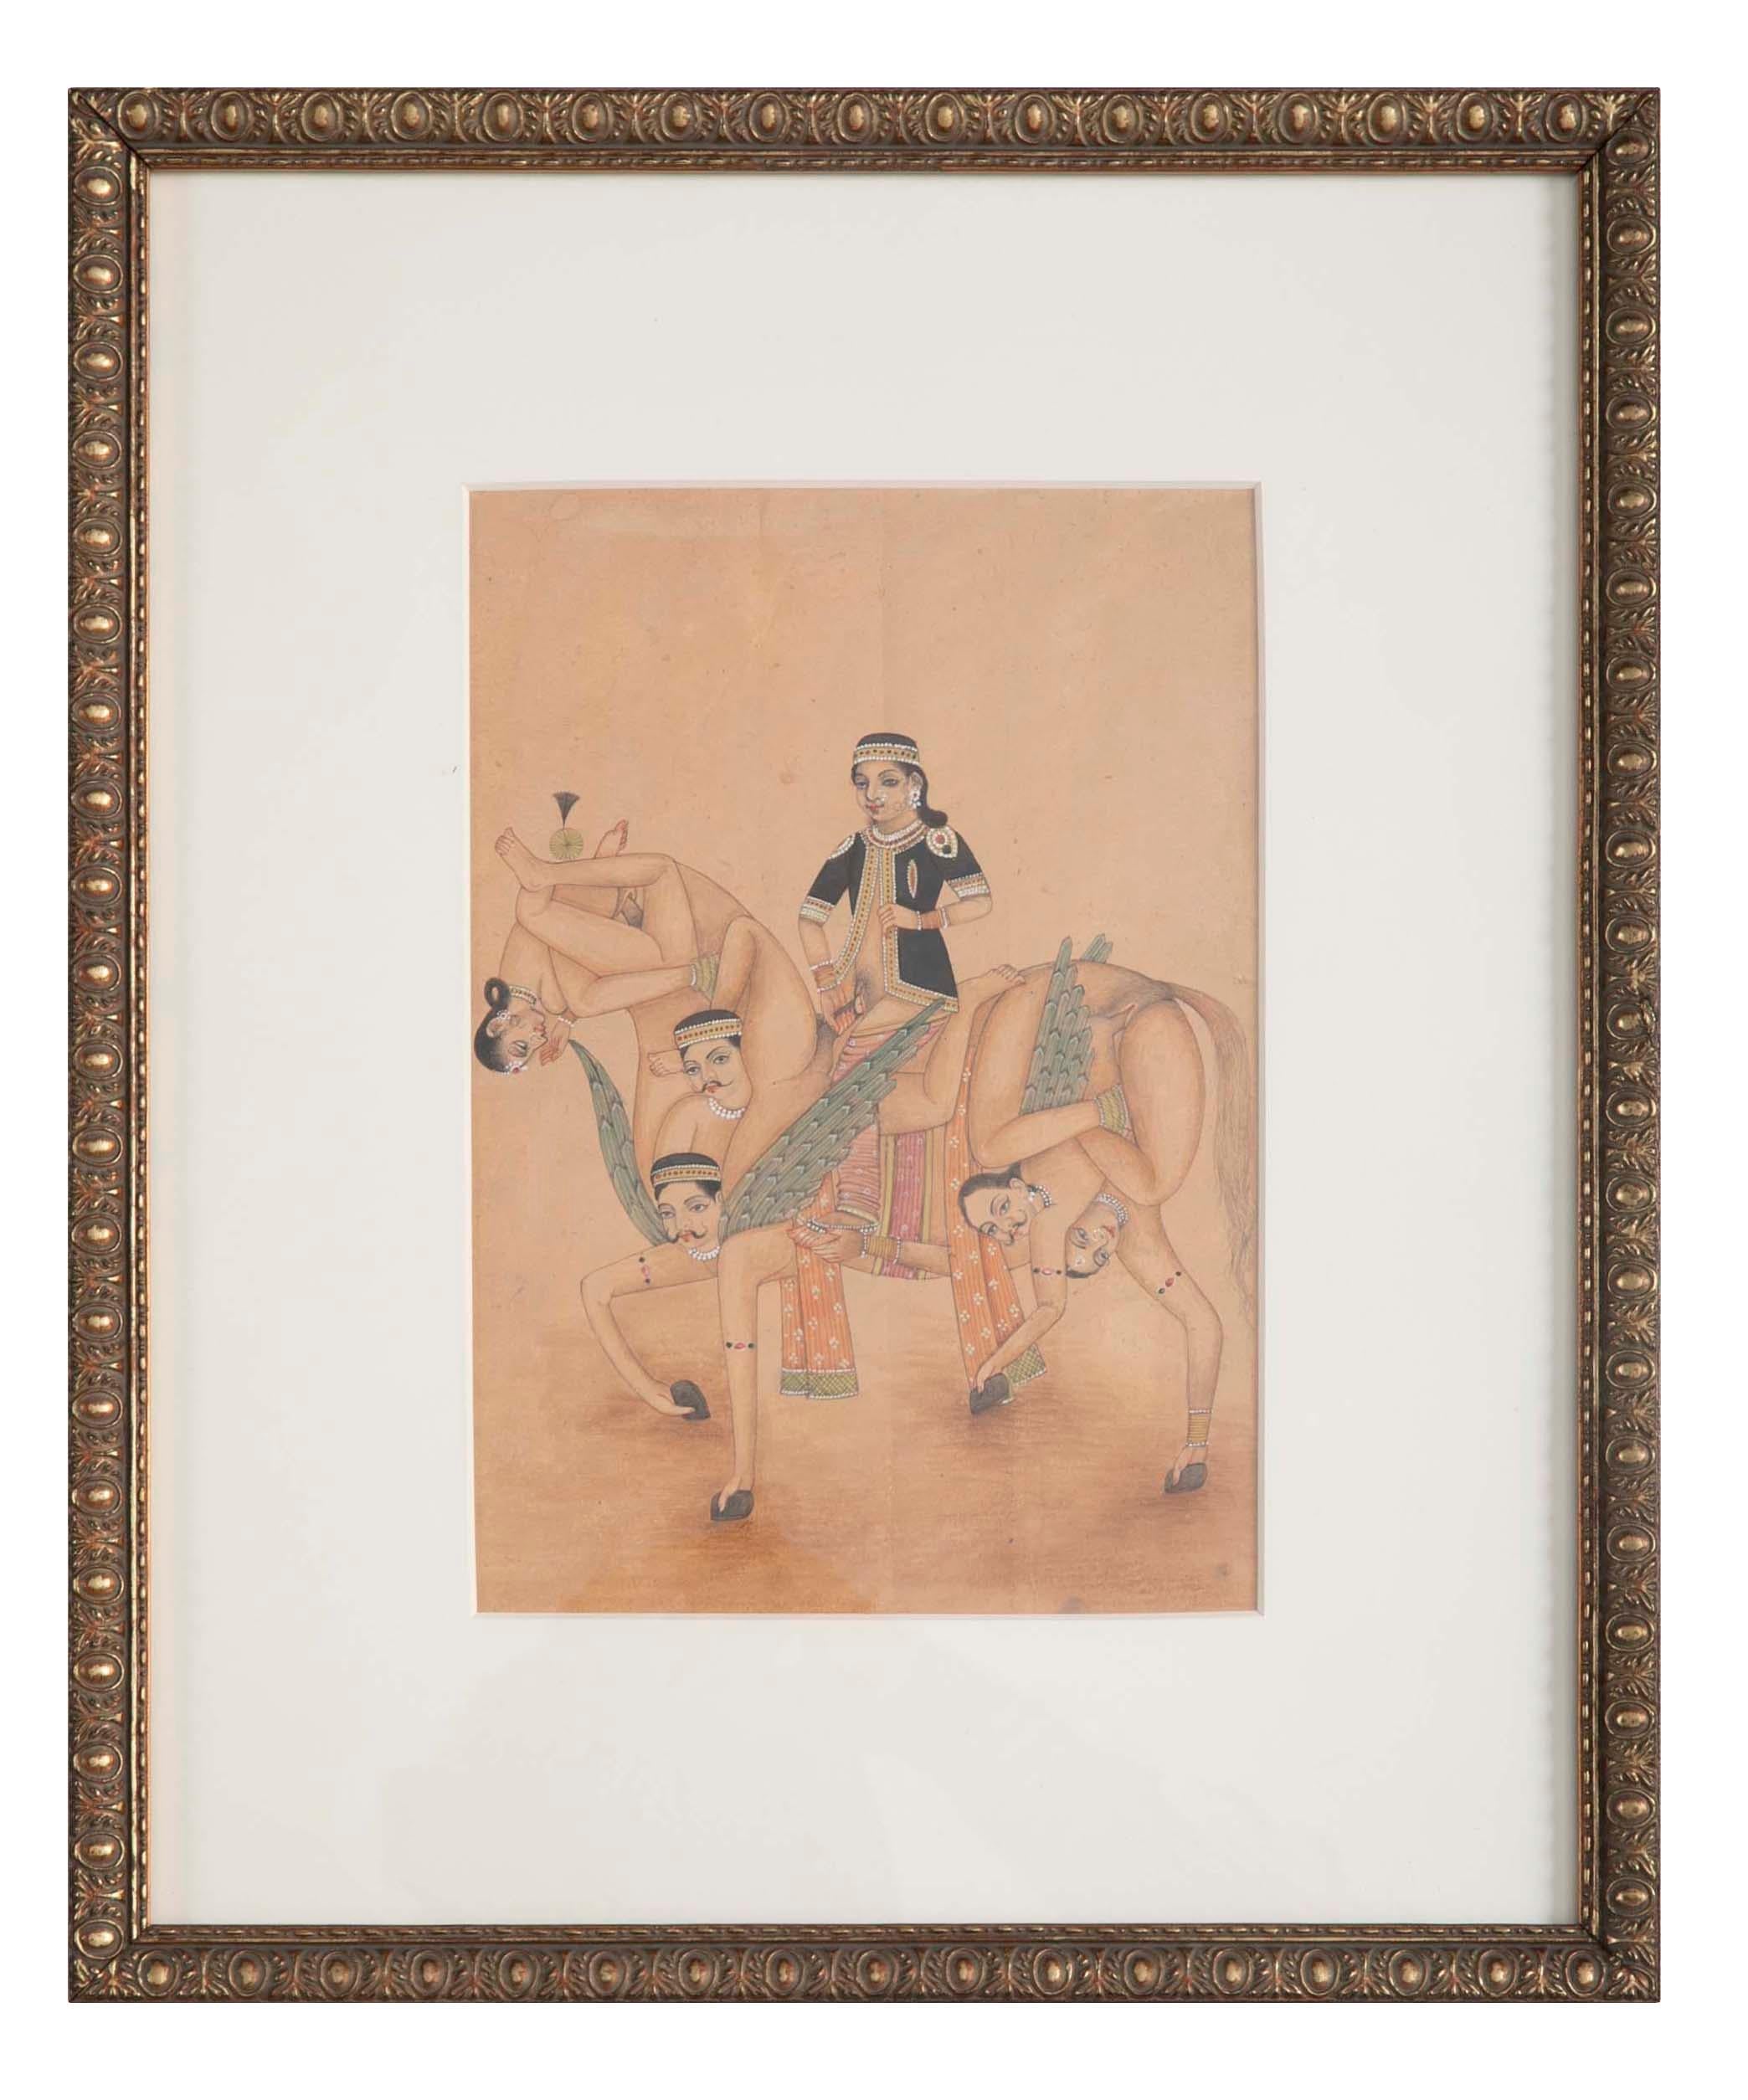 Paper Indian Erotic Kama Sutra Zoomorphic Gouache of a Horse